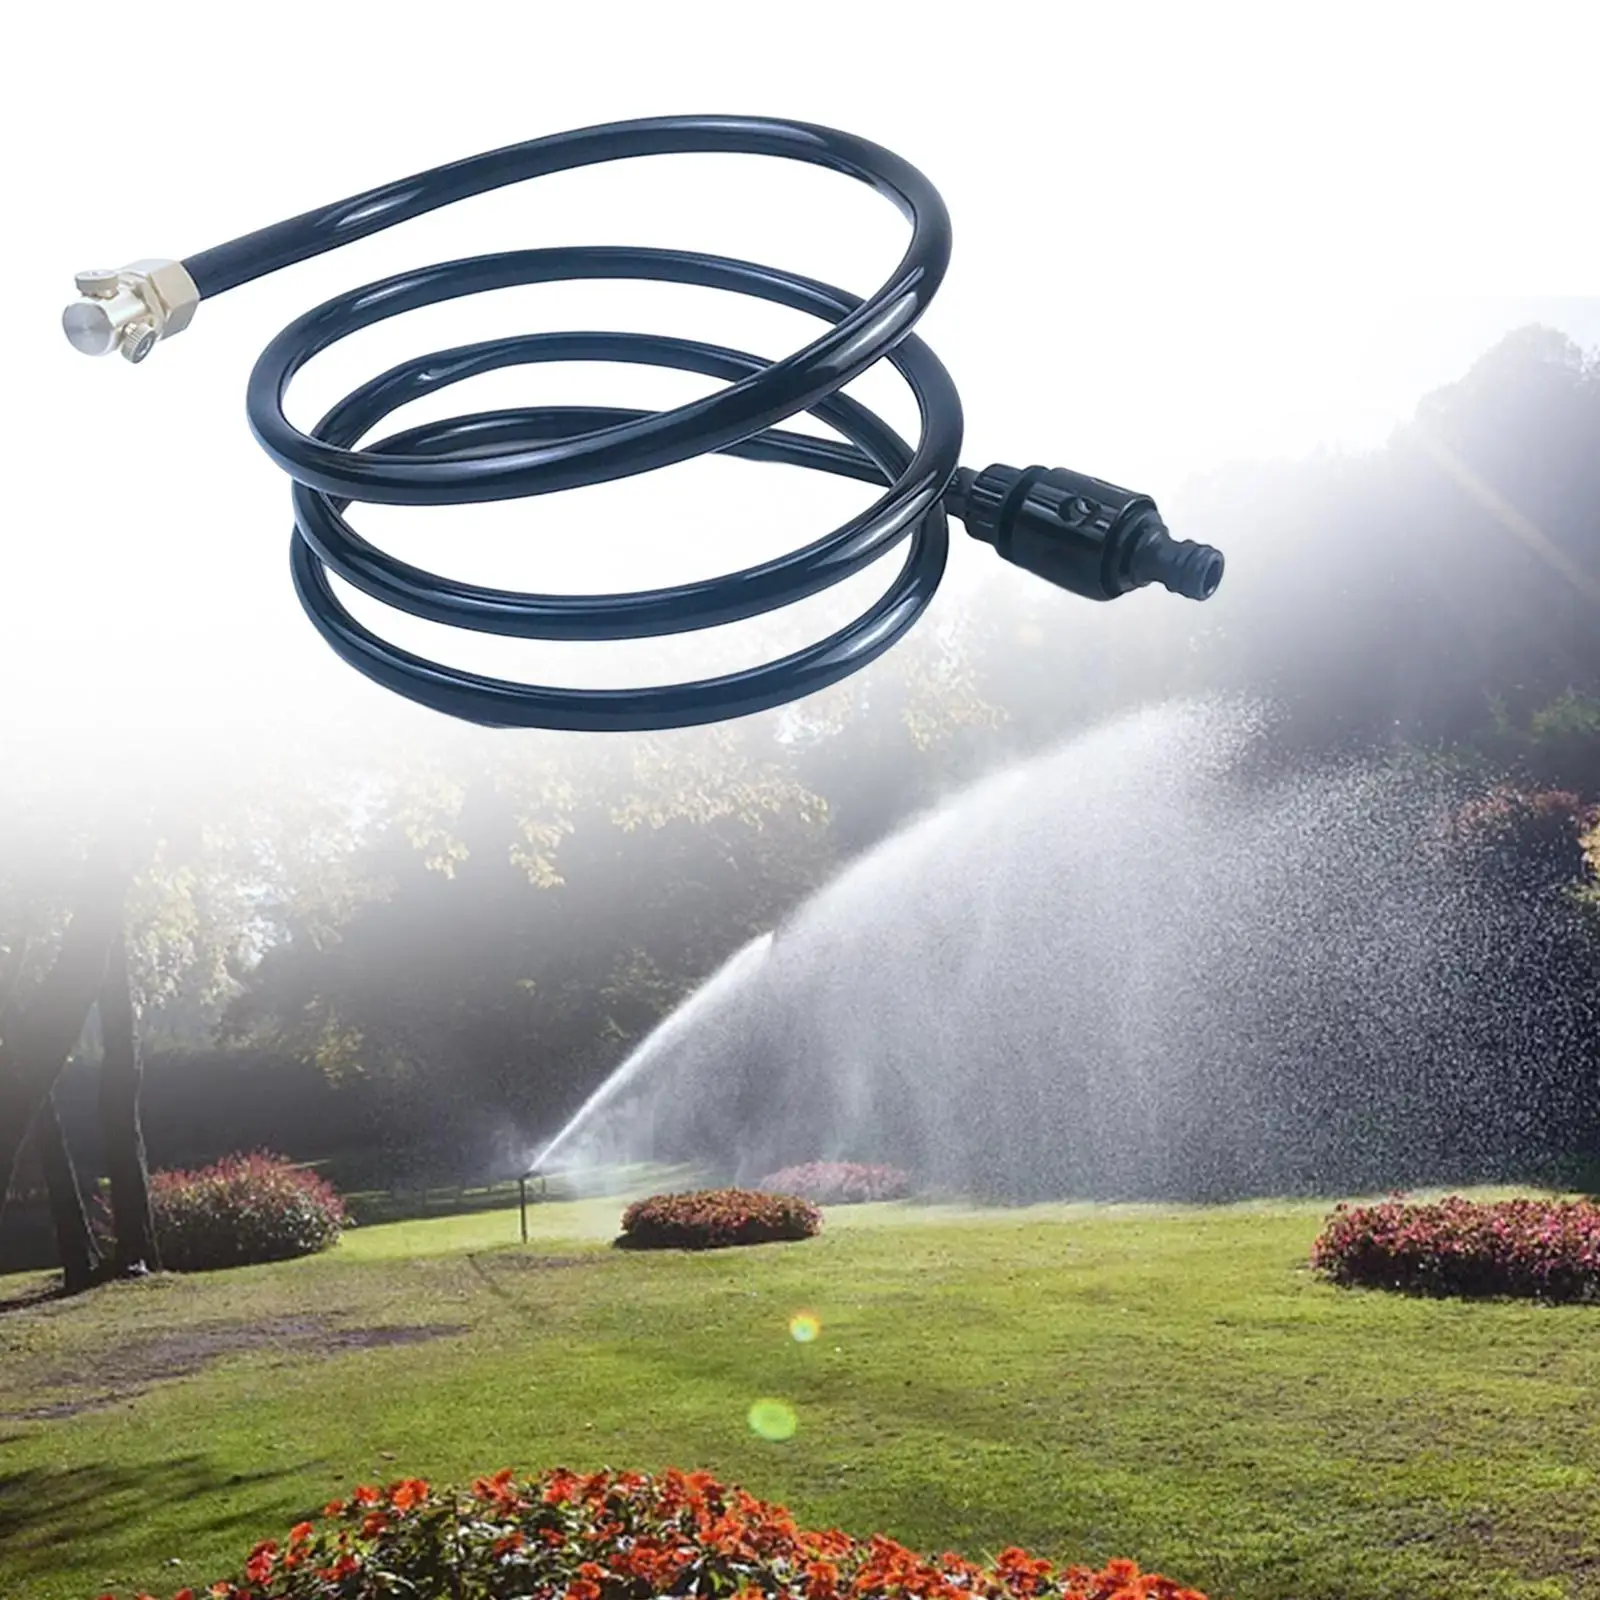 Mist Spray Tube Flexible Attachment Mist Stand Hose for Outdoor Cooling, Garden, Swimming Pool, Patio, Lawn,